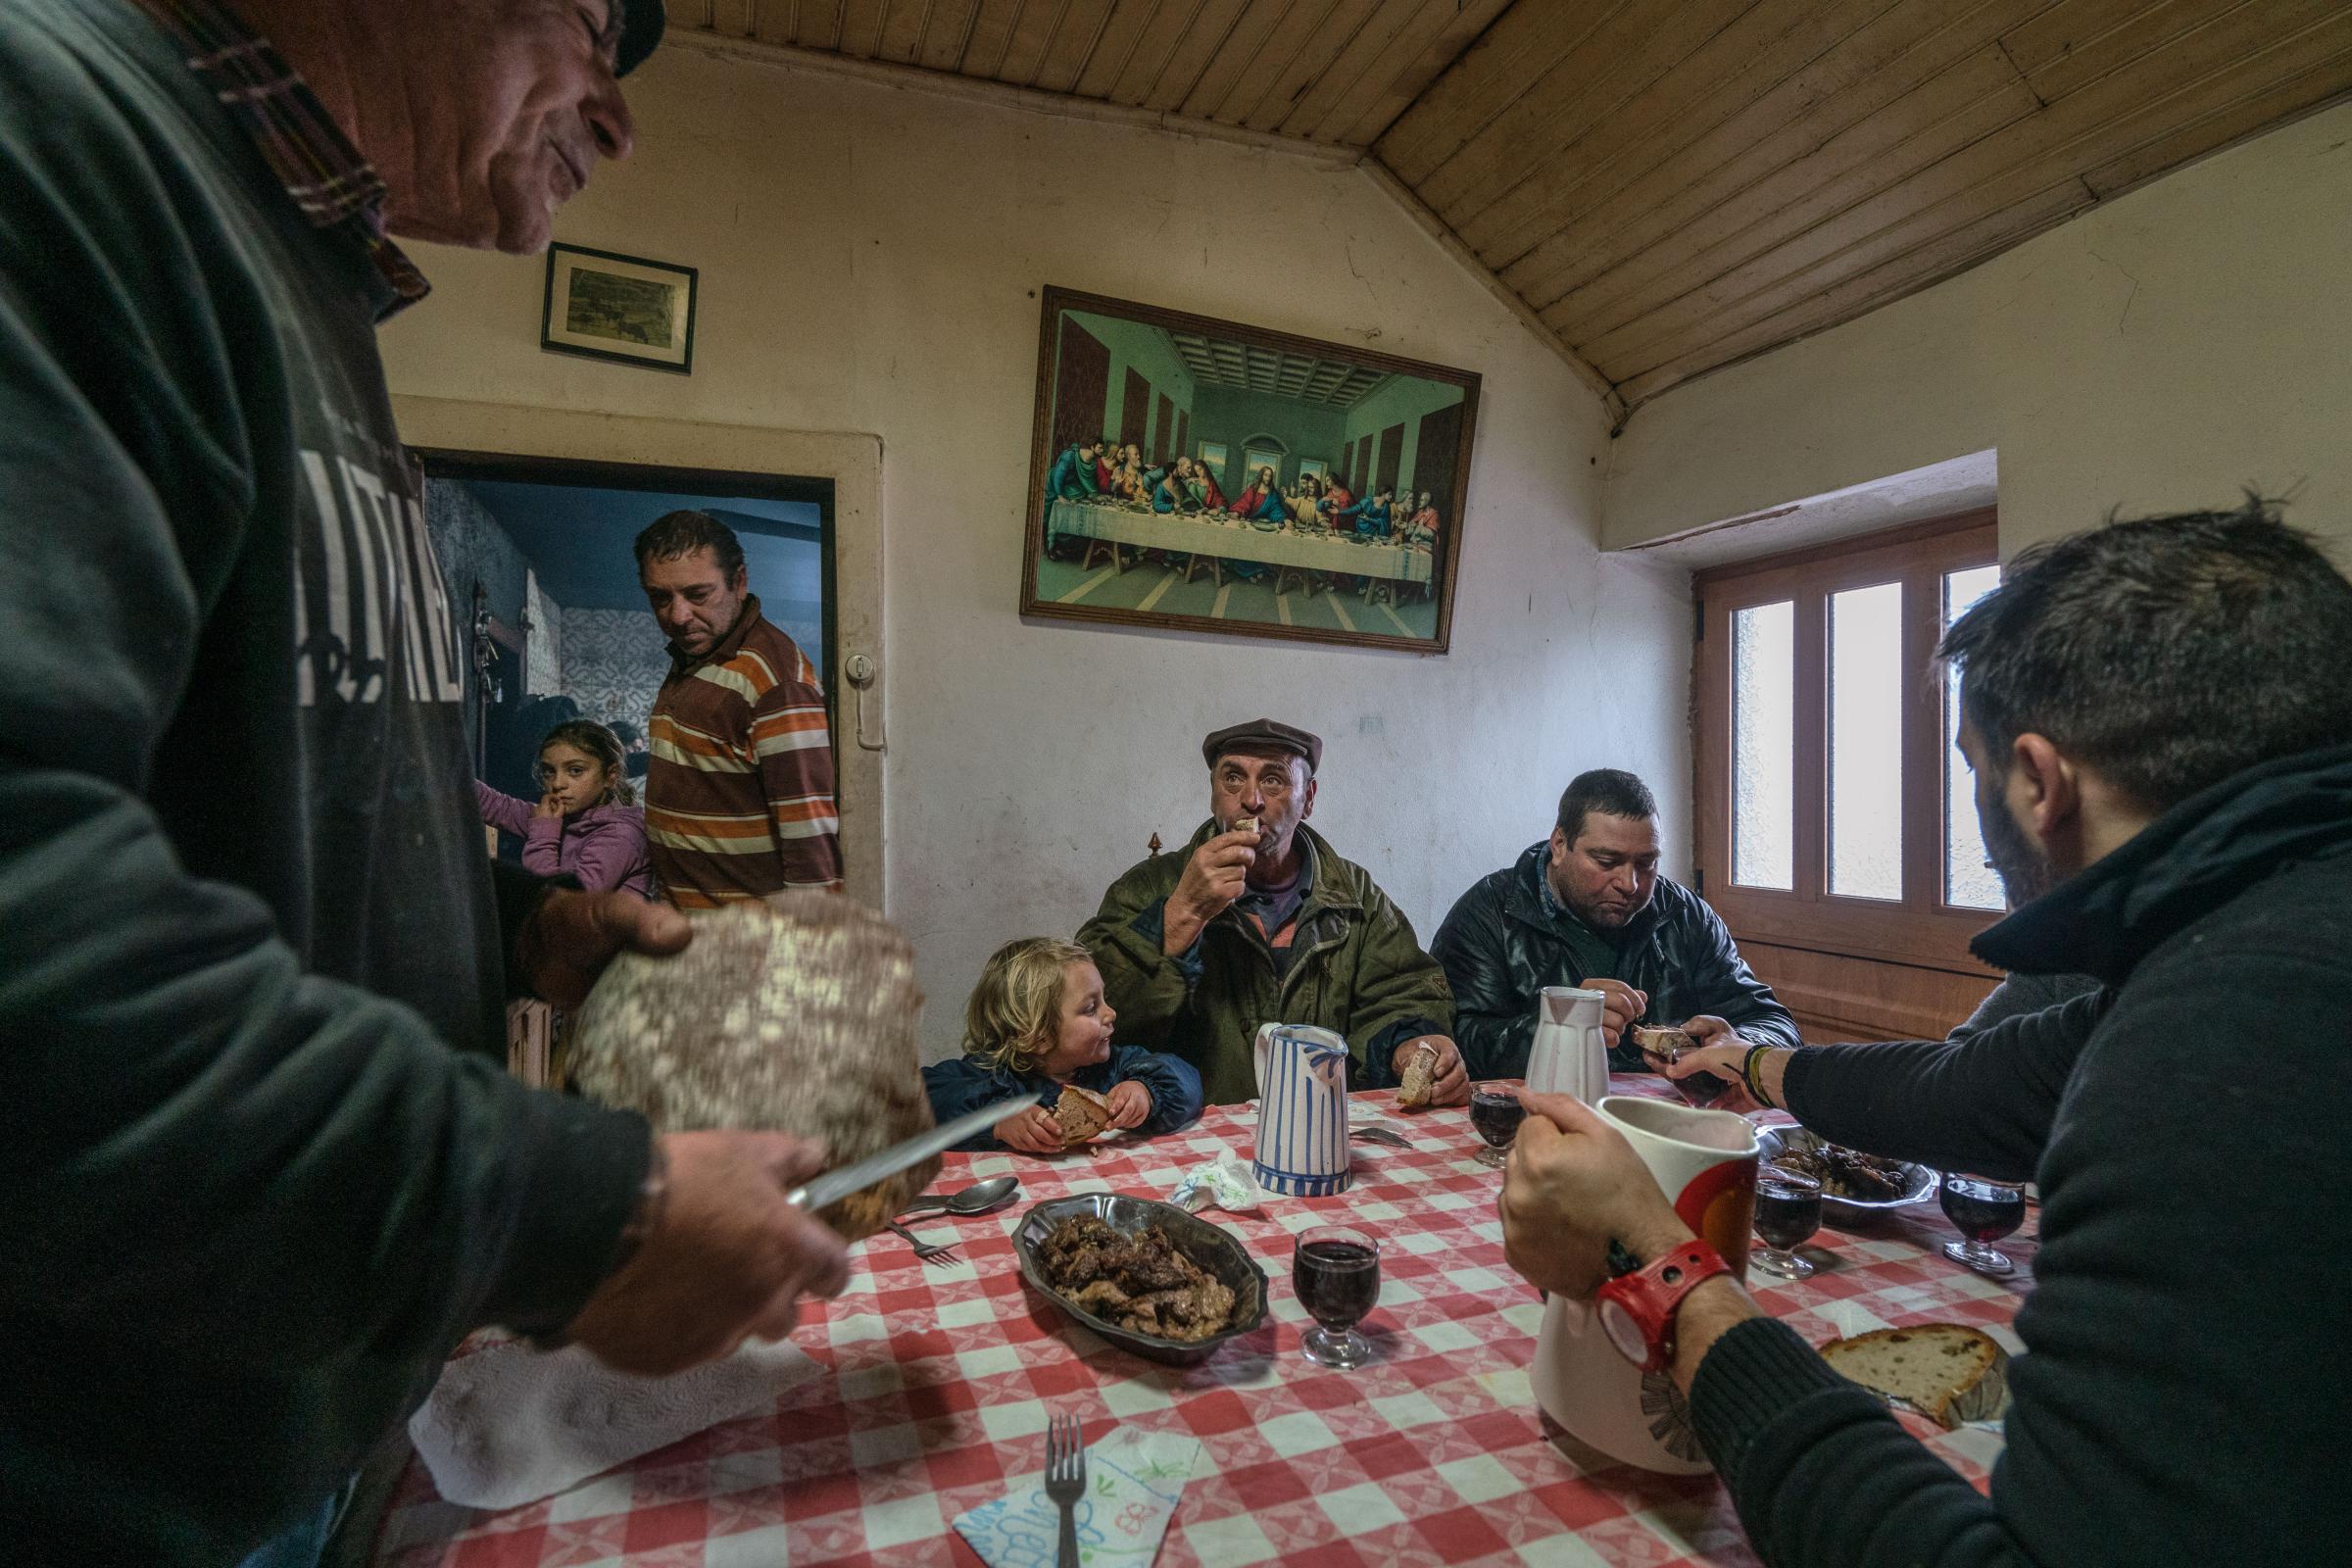 Vilarinho Seco, December 14th, 2019 - Elias Coelho (left) serves homemade bread to his family and neighbors after they all spent the morning slaughtering pigs outside his home in Vilarinho Seco. Every year, at the beginning of the winter, residents of villages in the Barroso region slaughter pigs to make ham and sausages that feed them all through the year. The slaughter is a community event, with neighbors and friends coming to help with the killing, dismembering the animals, and preparing the meat to smoke. In the end, the host treats them to a feast Vilarinho Seco Portugal